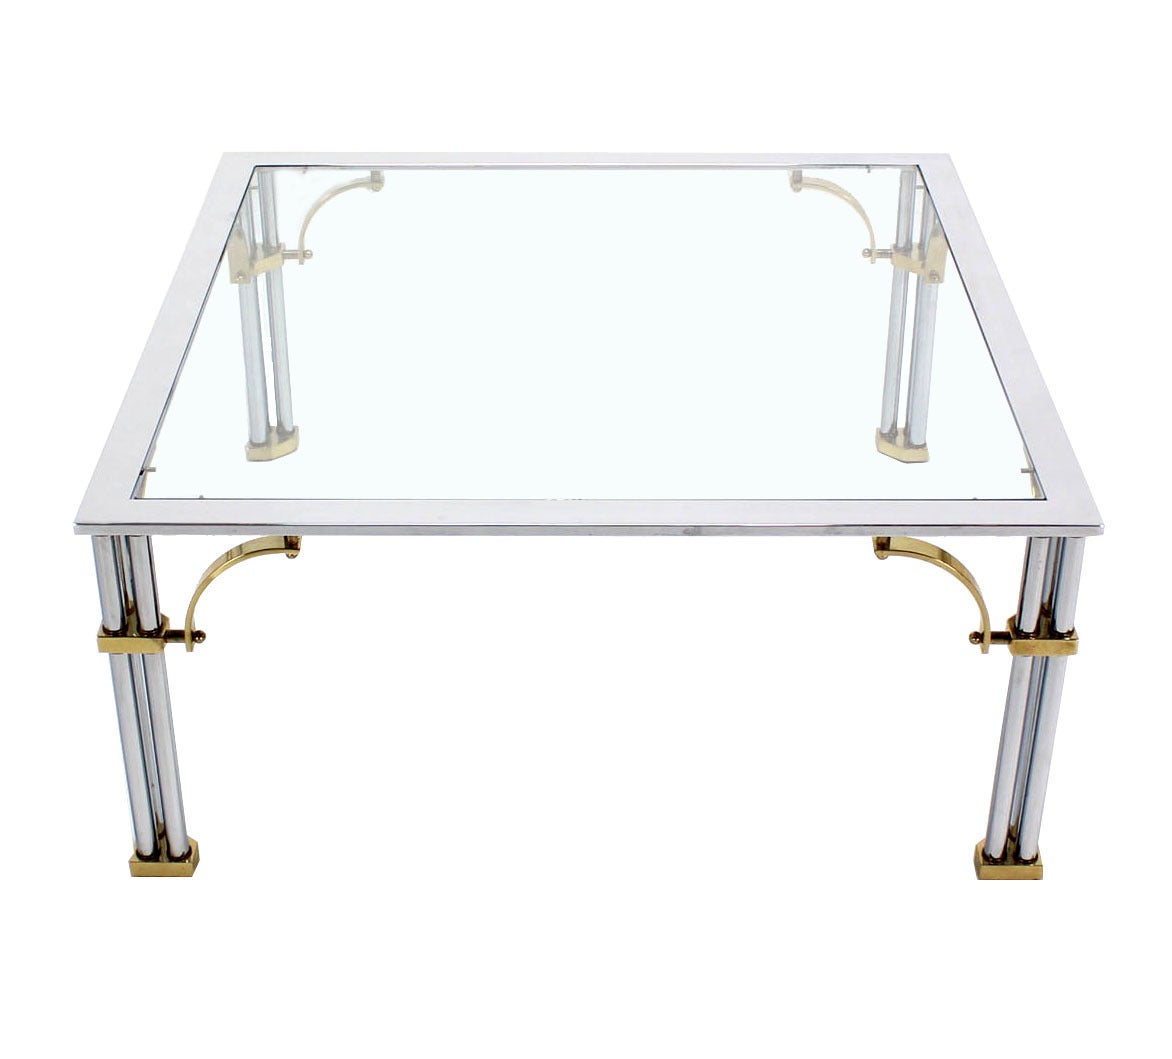 Brass Chrome Glass Top Square Coffee Table